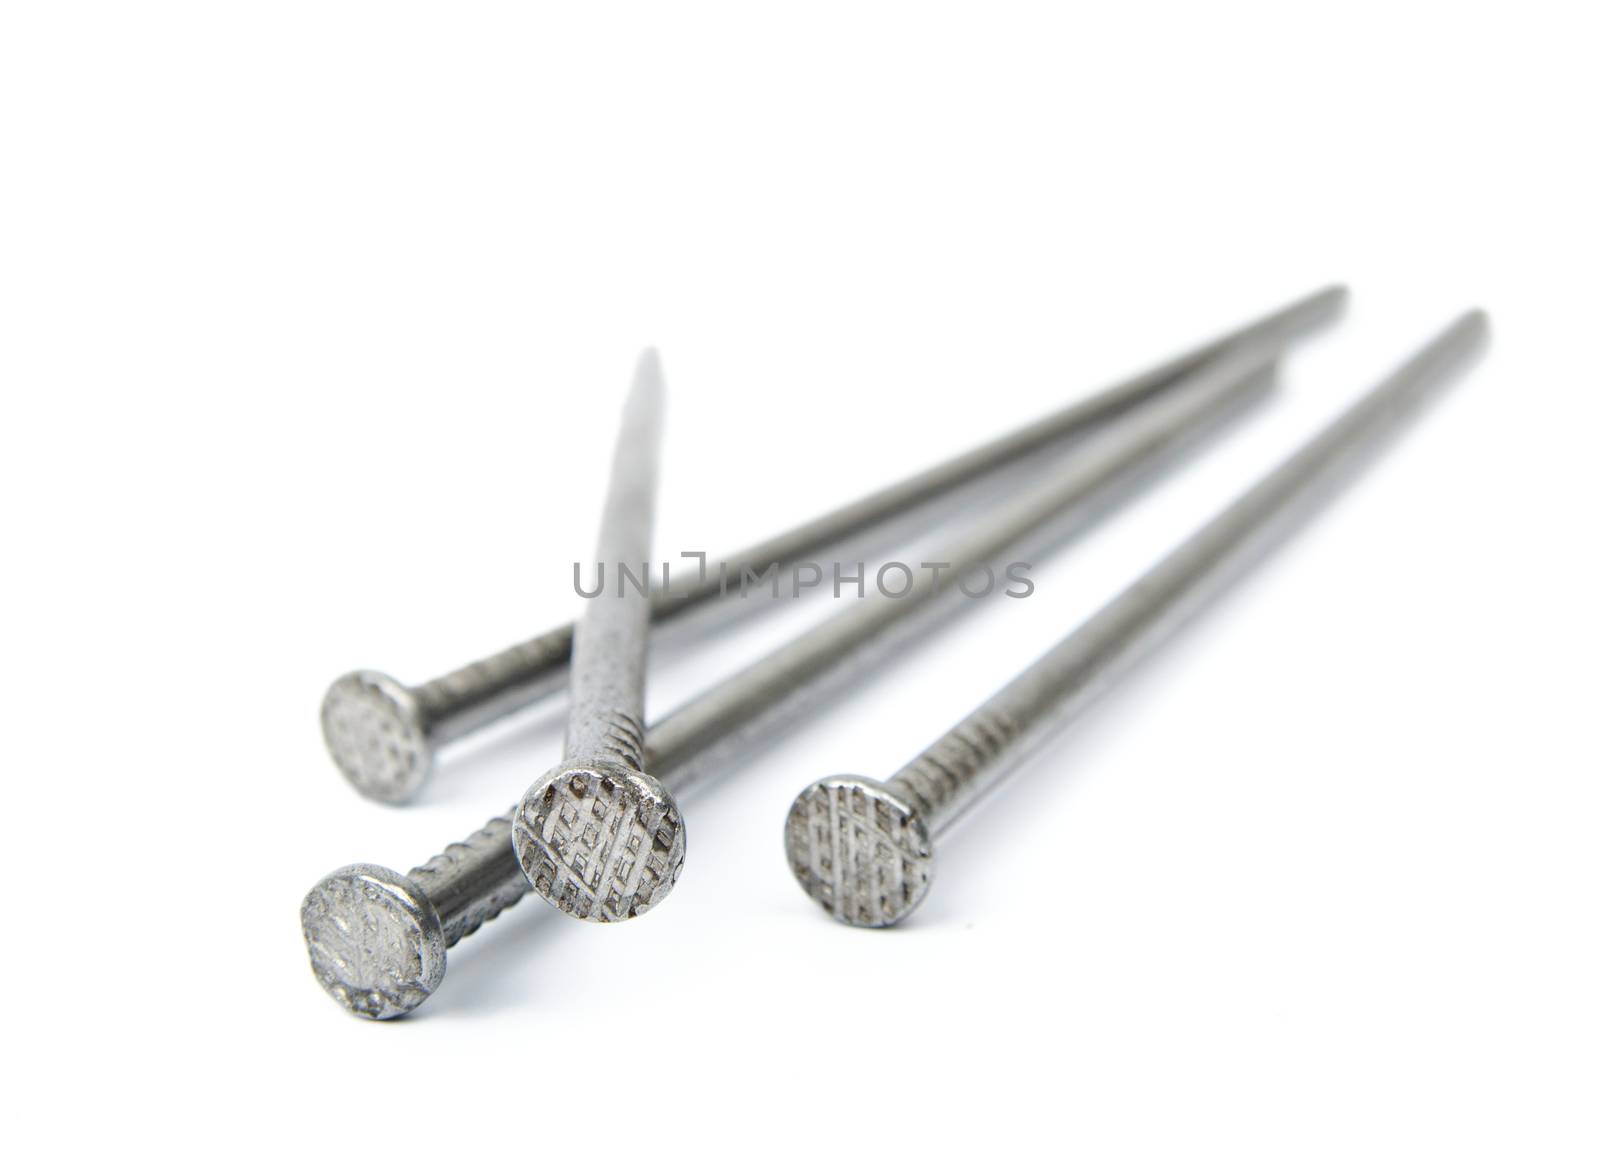 An image of Iron nails on white background